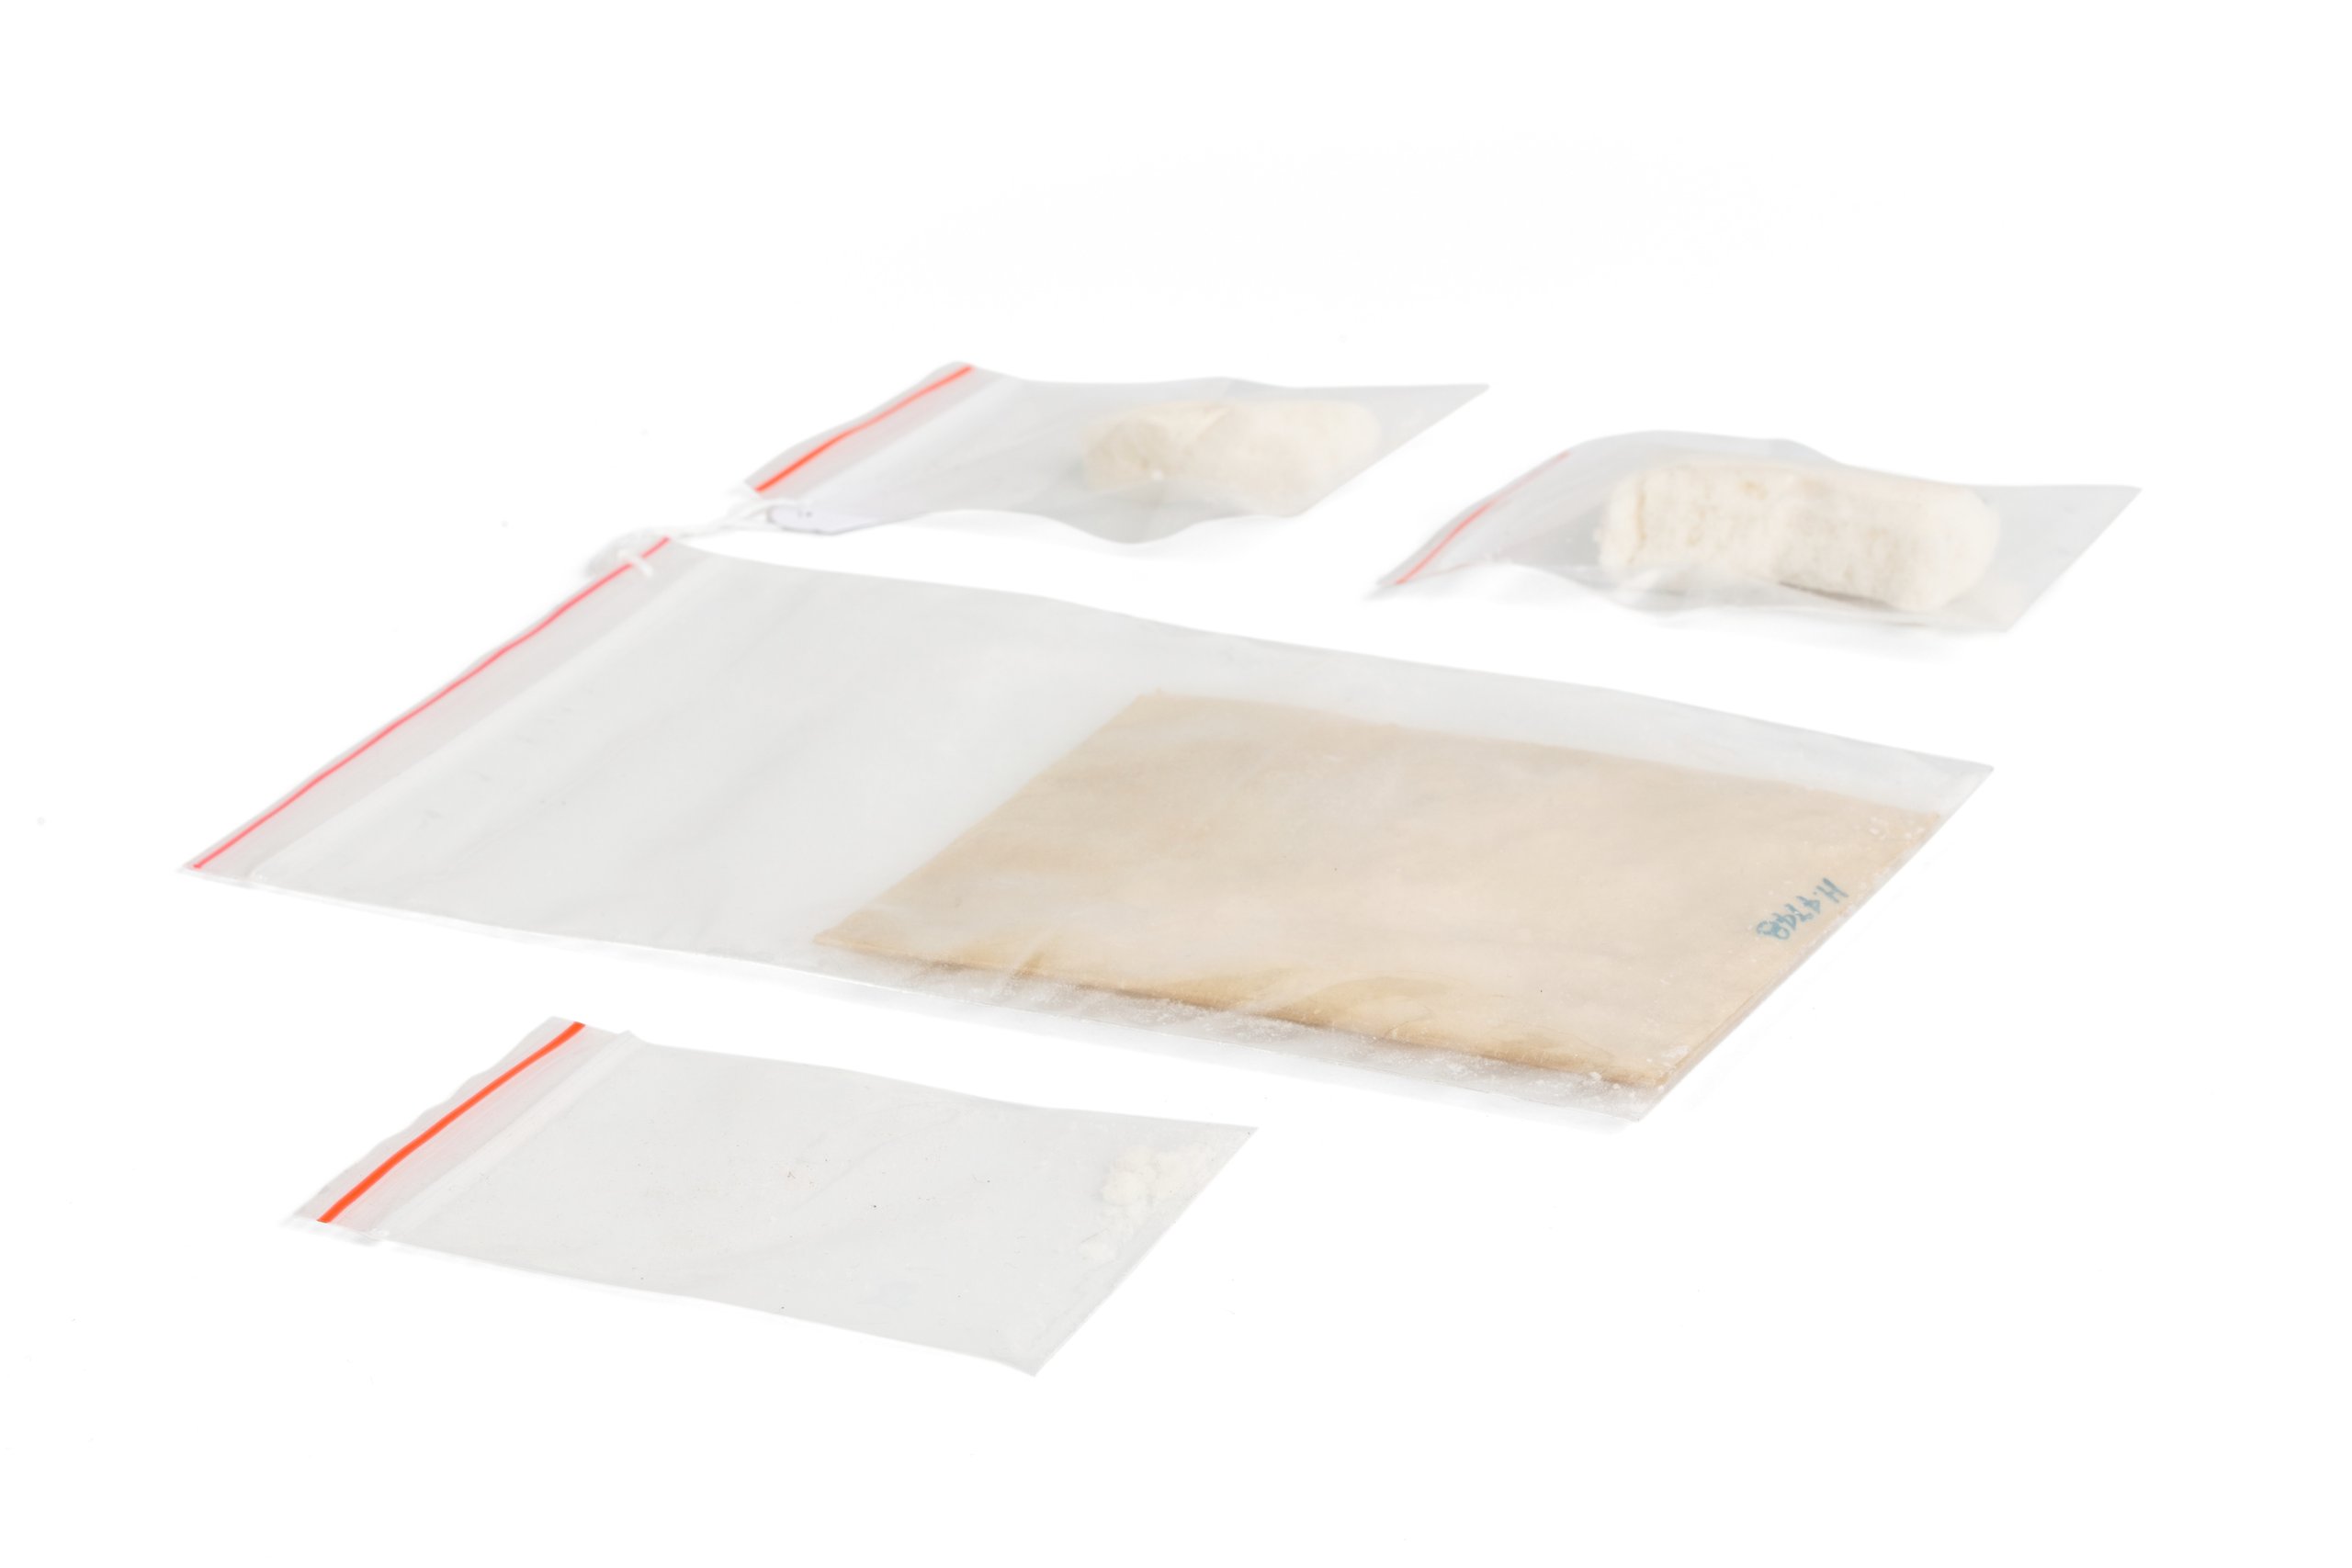 Samples of insulation